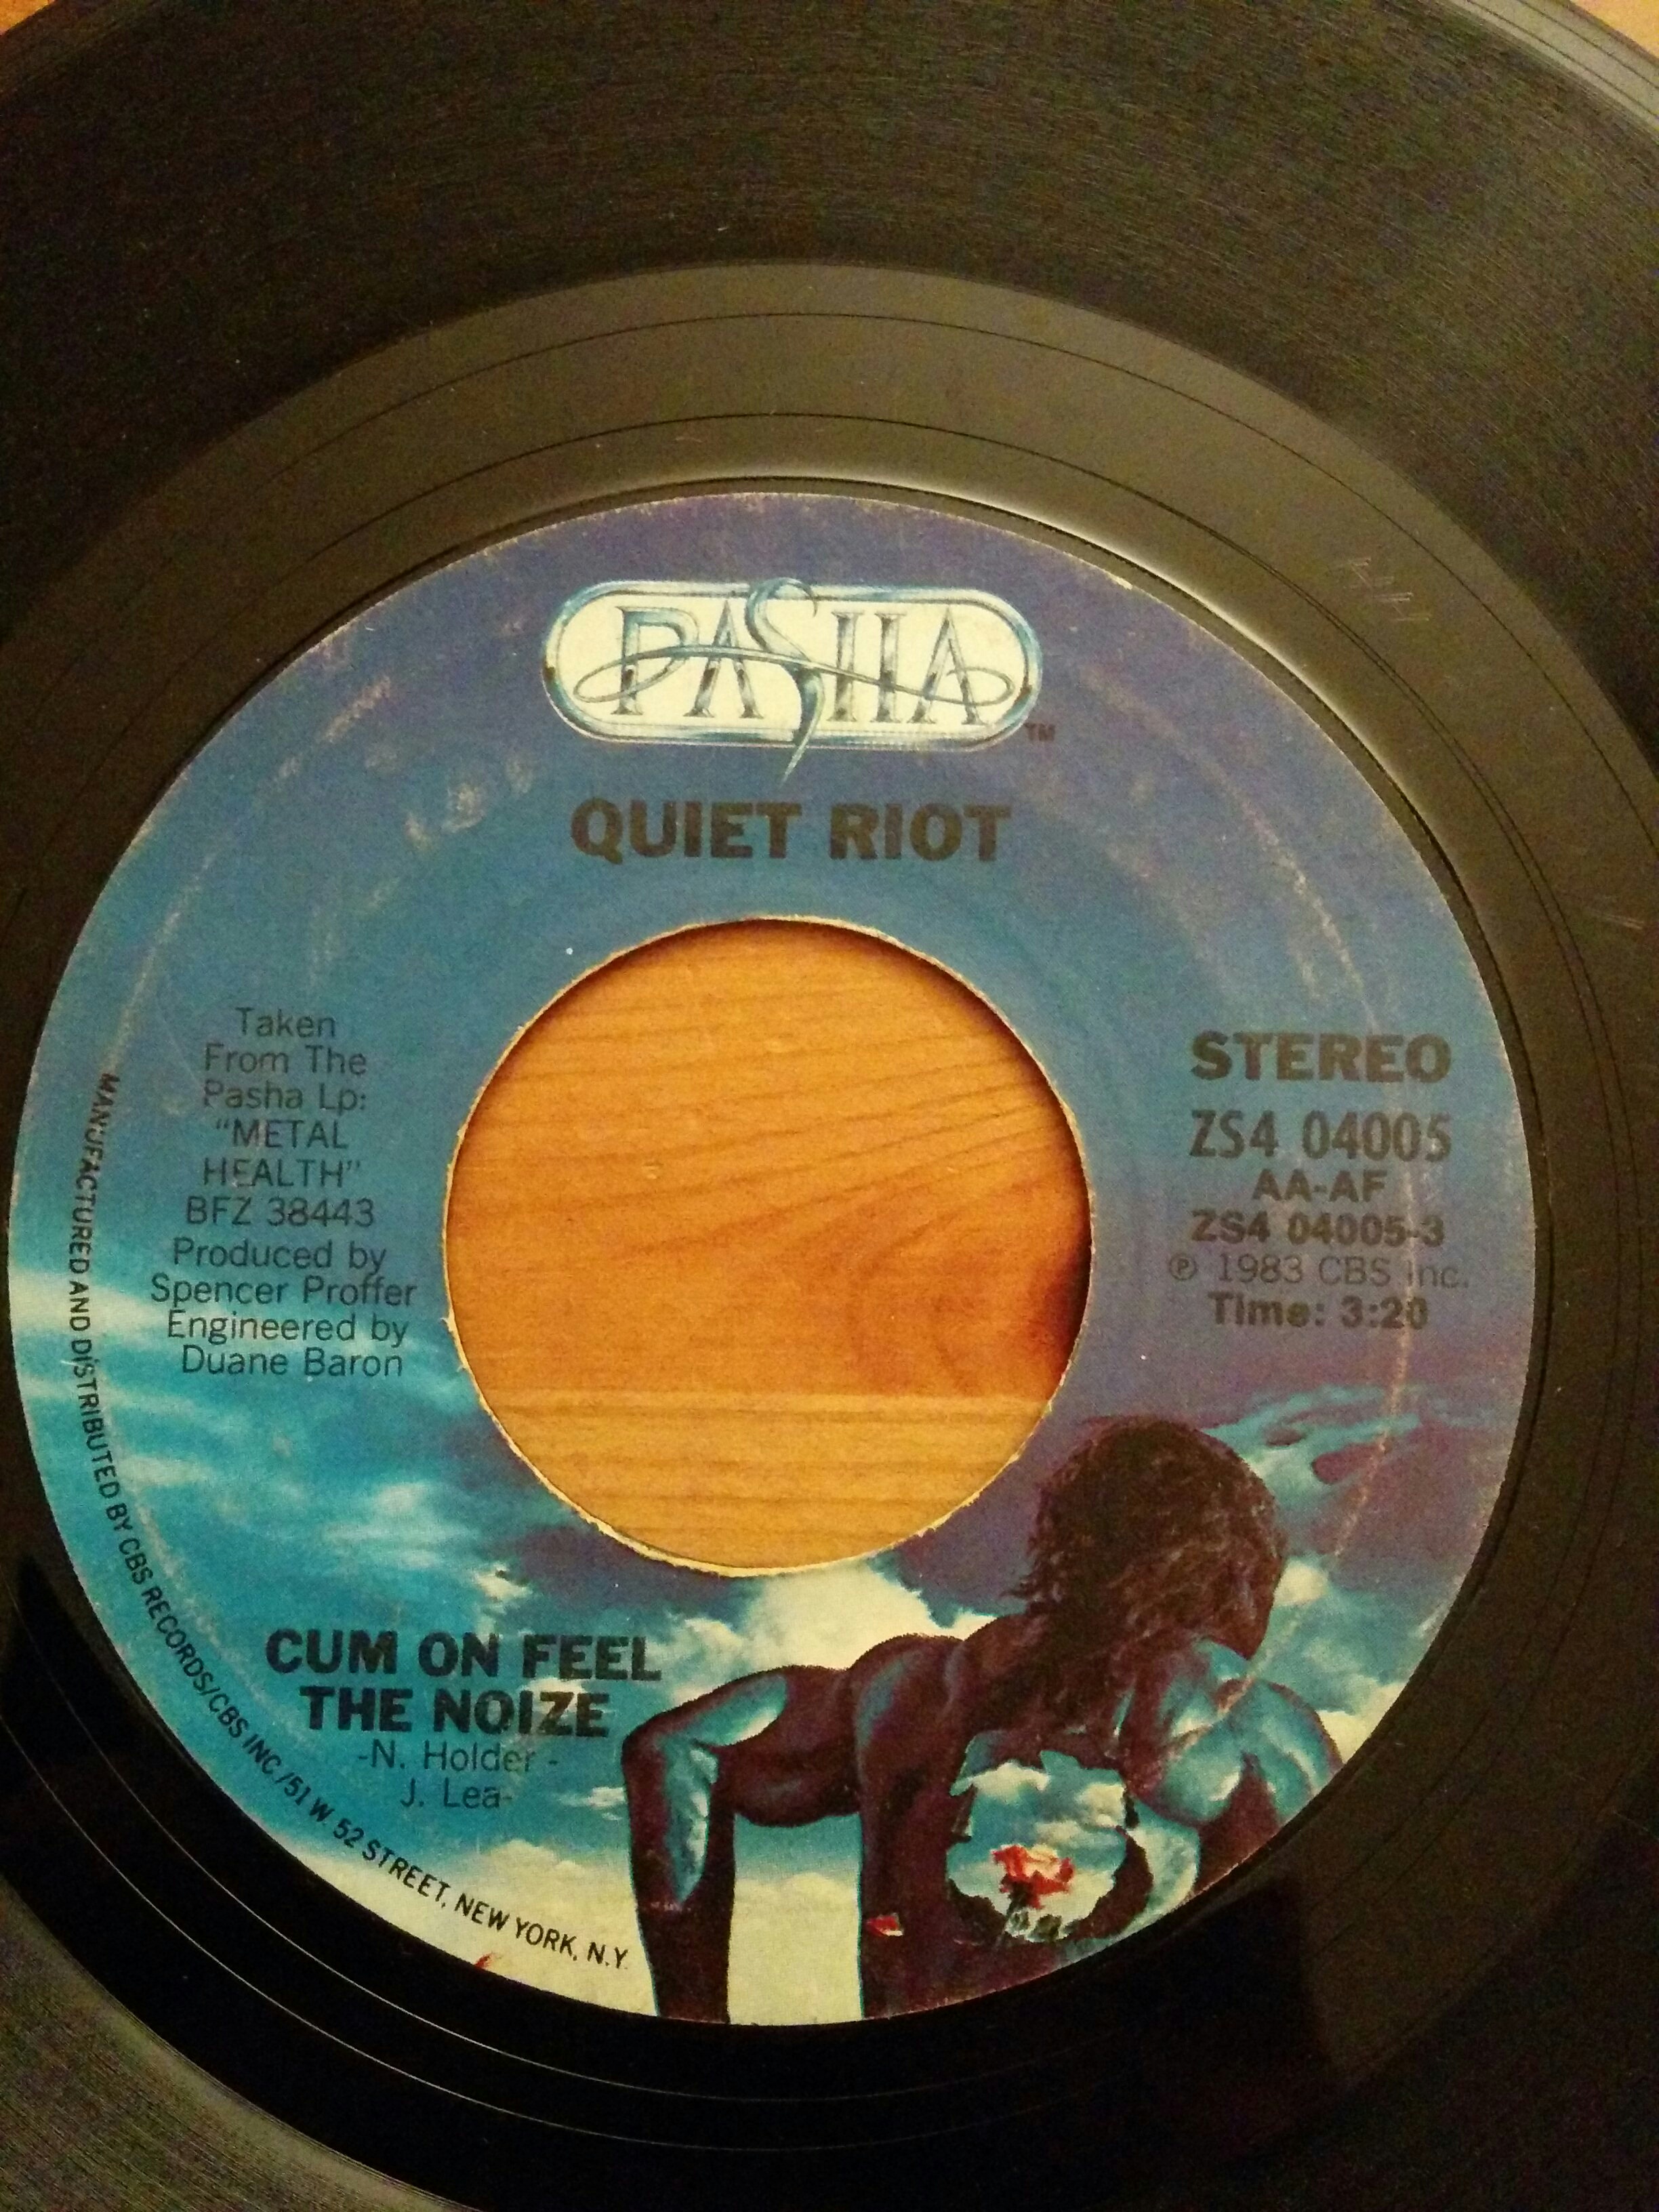 Quiet Riot's "Cum on Feel the Noize" 45